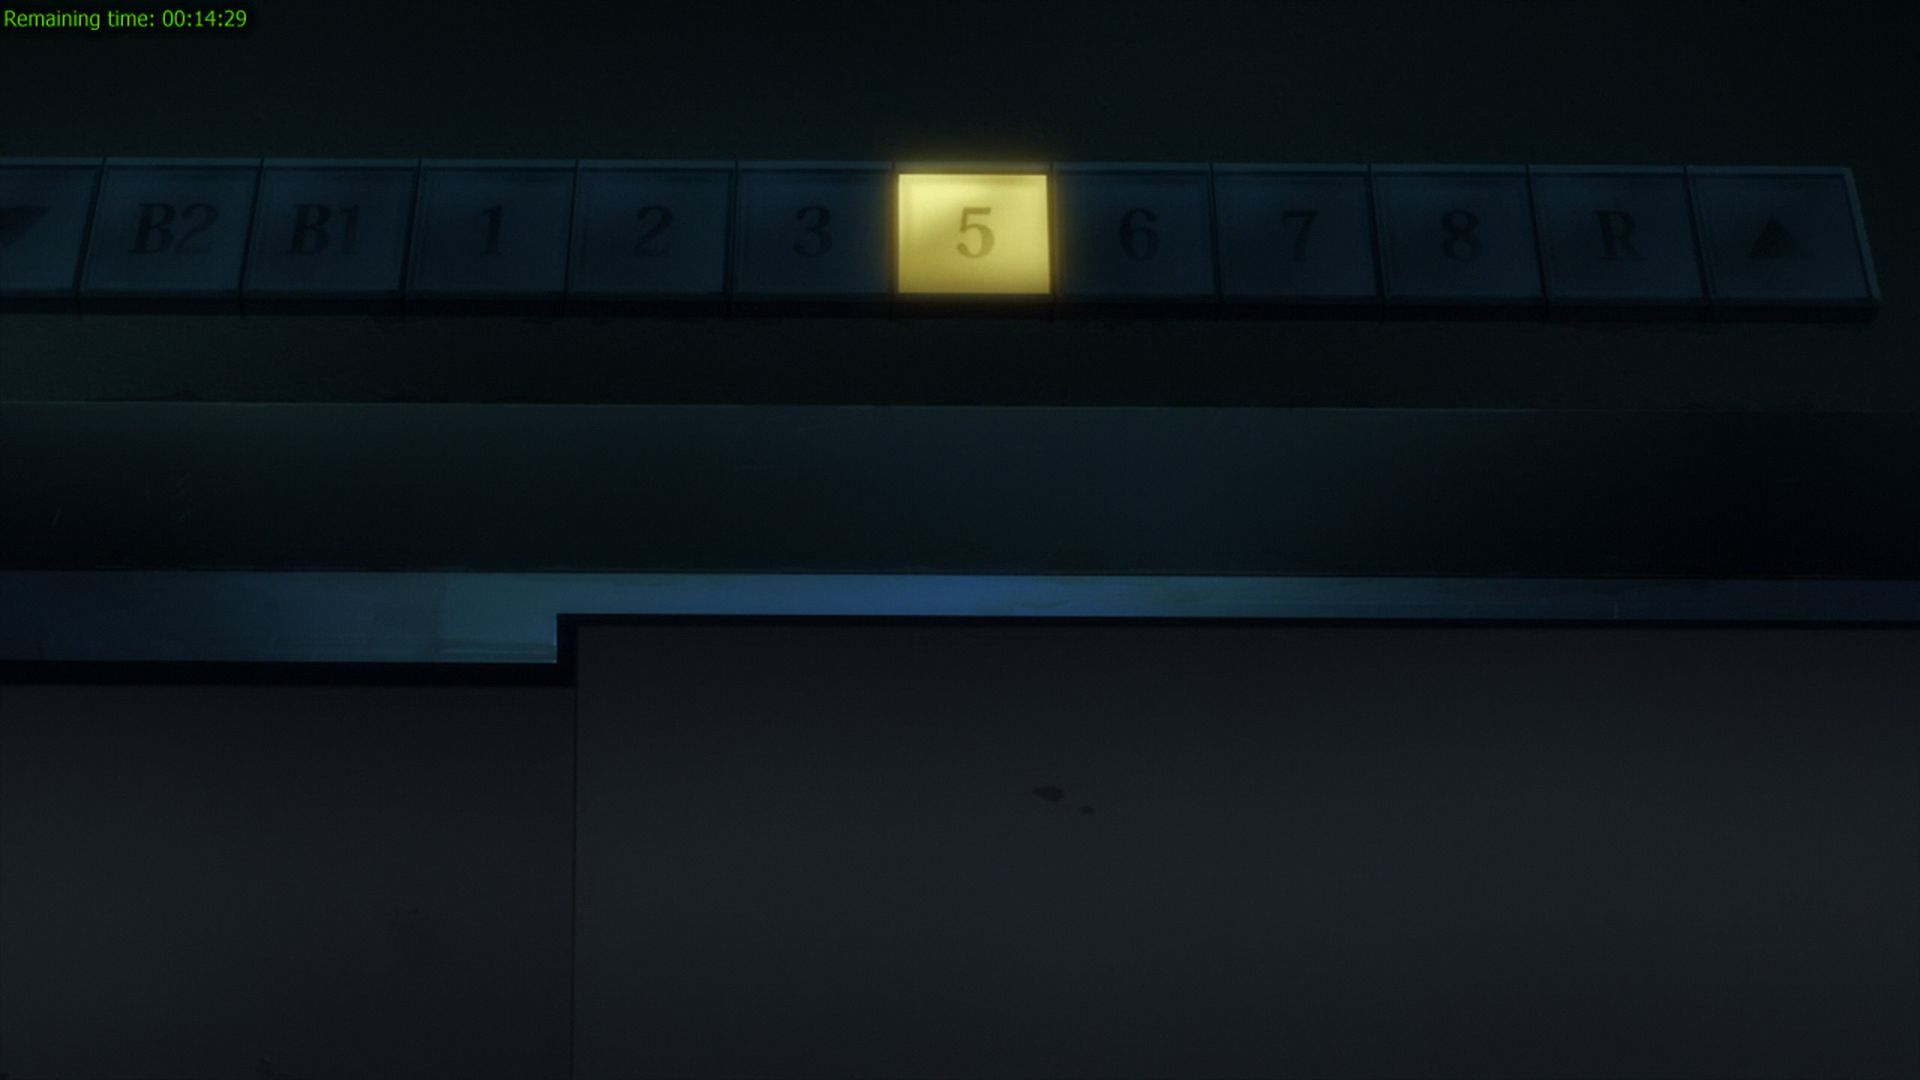 Befitting the genre this anime falls into, the hospitals in this anime also practised skipping death numbers for their floors' numbering scheme. I've seen this in real life, but didn't really expect to see it in my anime.